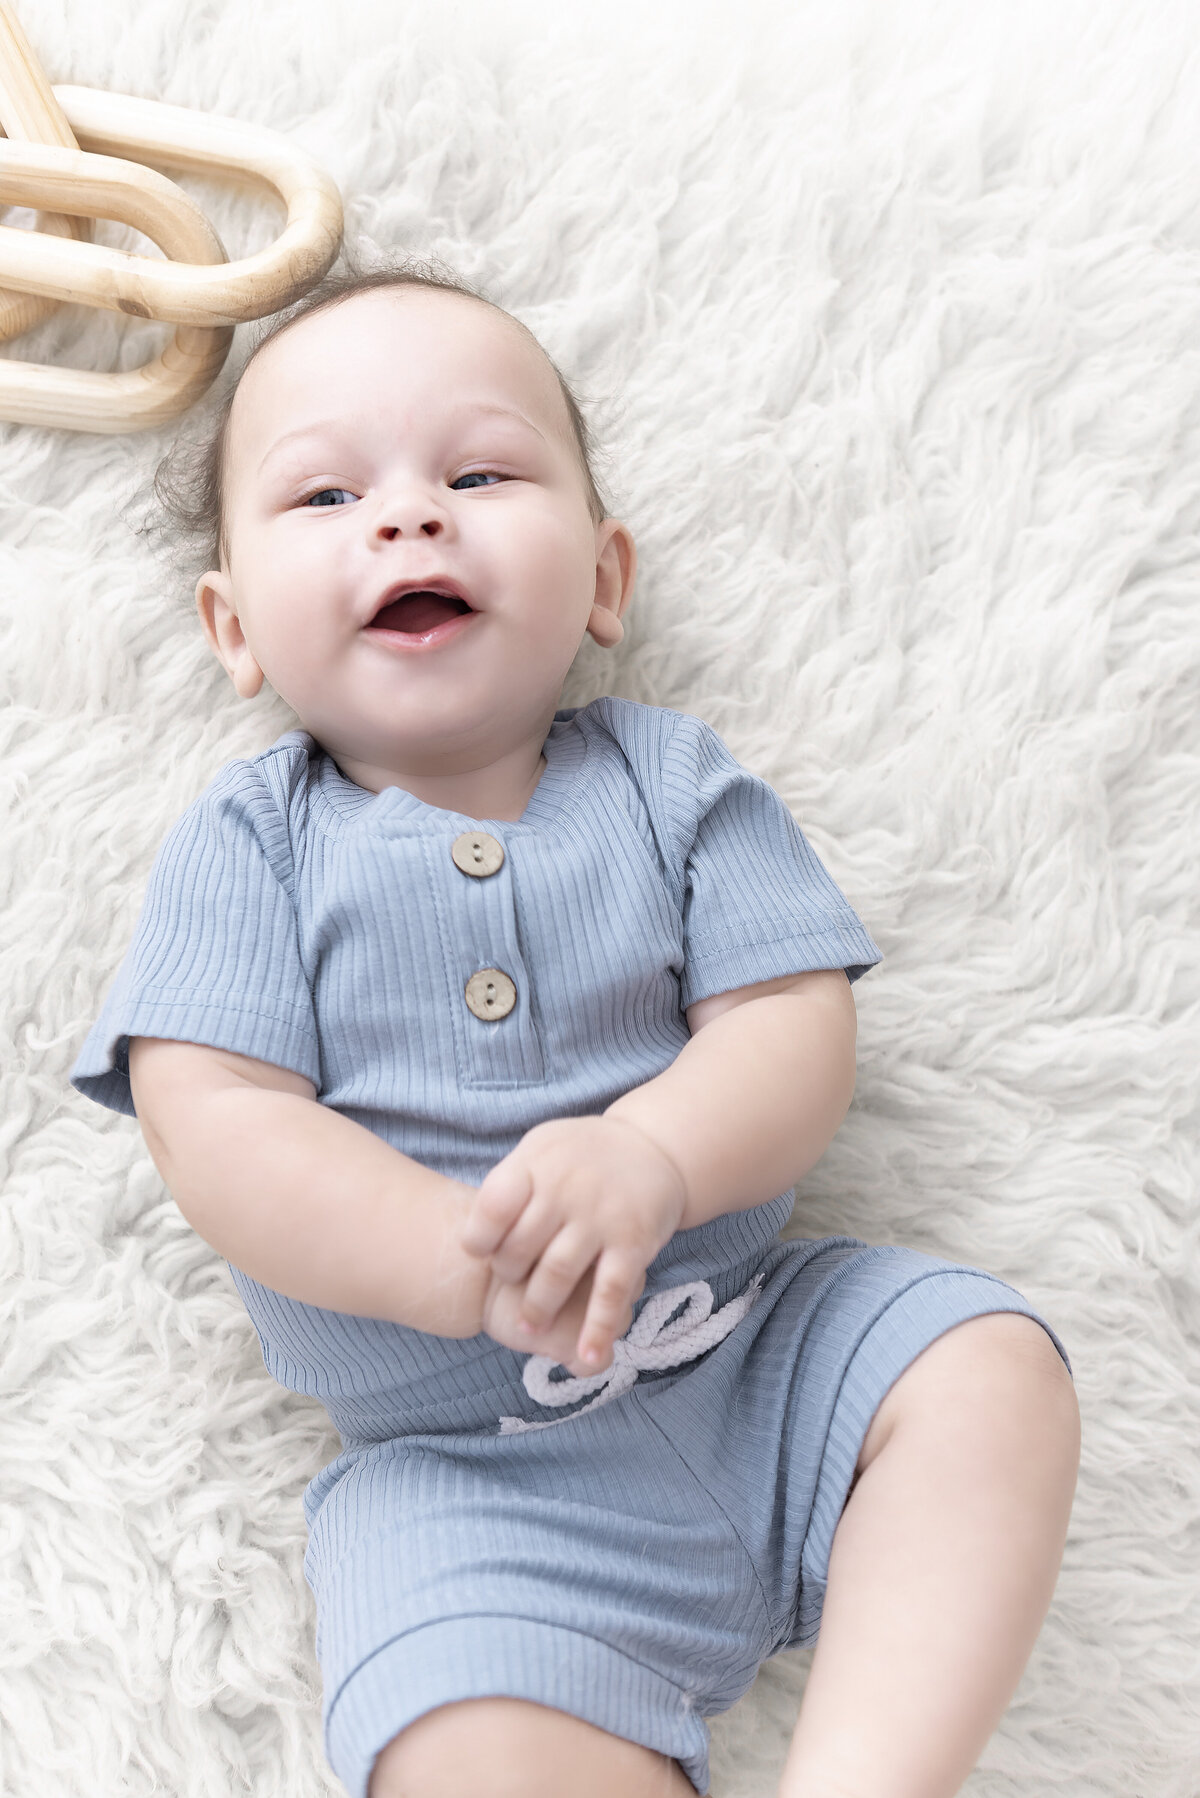 A happy young baby lays on a shag blanket smiling in a blue onesie